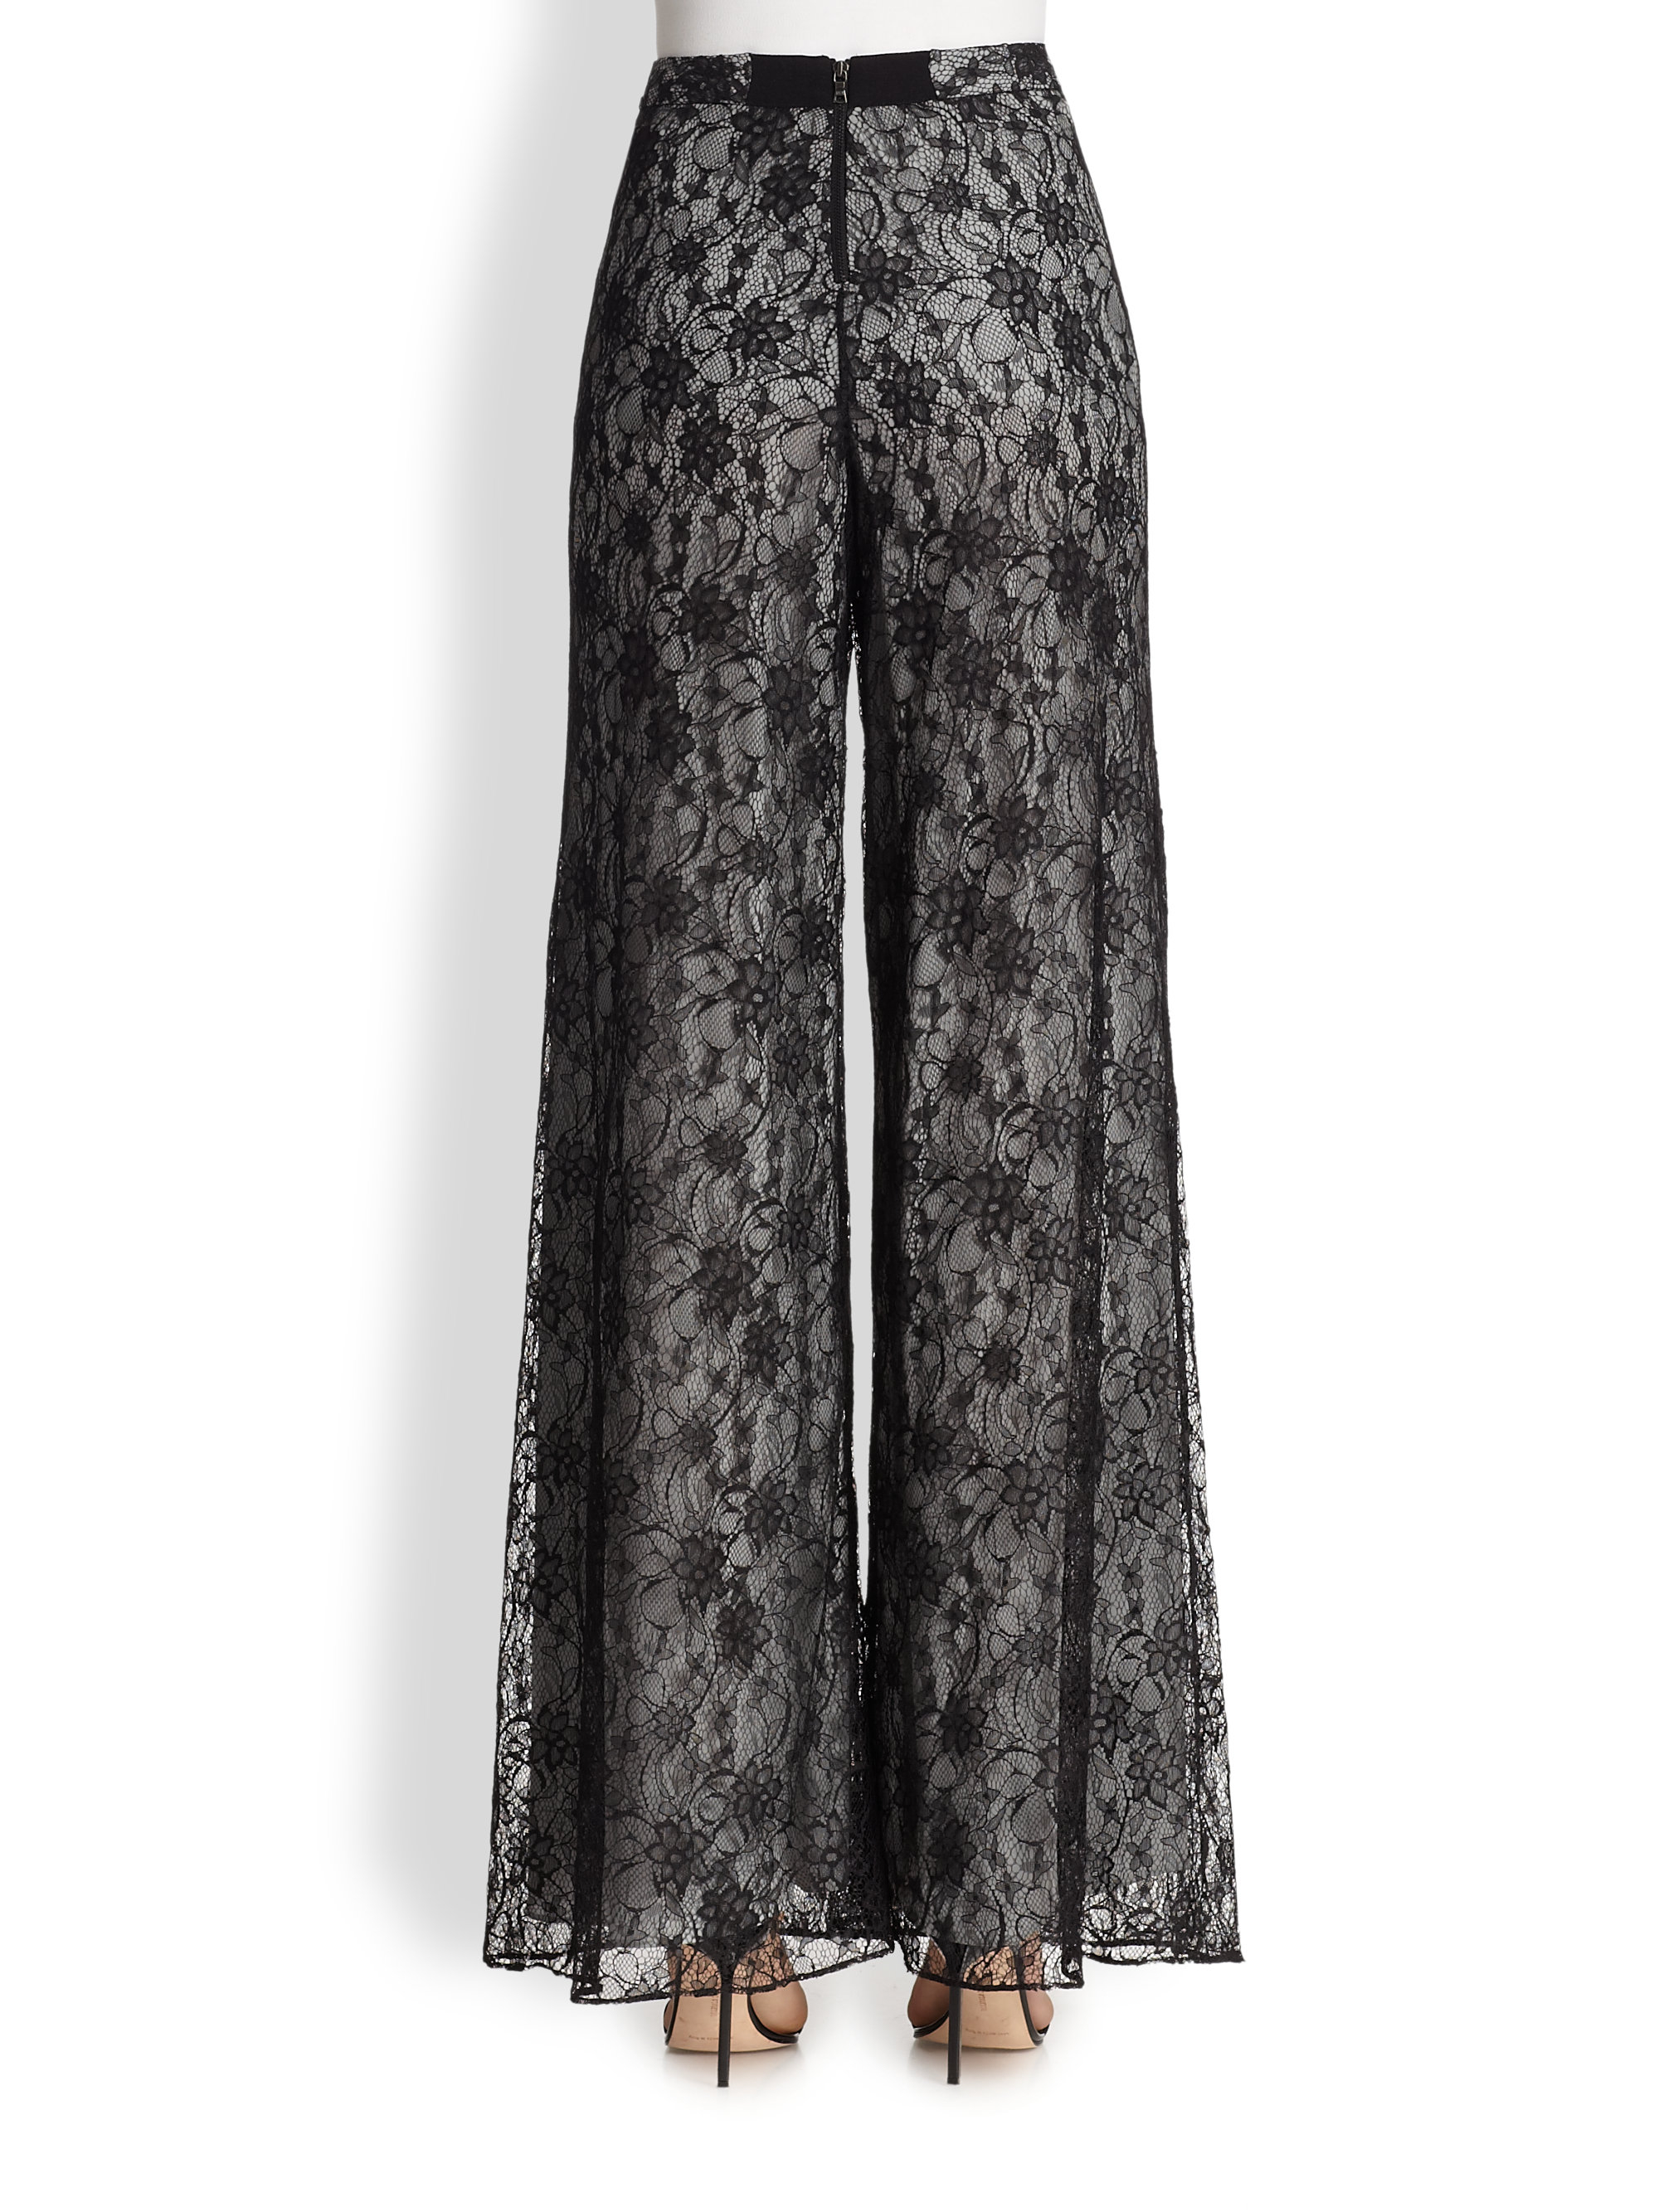 Alice + Olivia Super Flared Wide-Leg Lace Pants in Black | Lyst